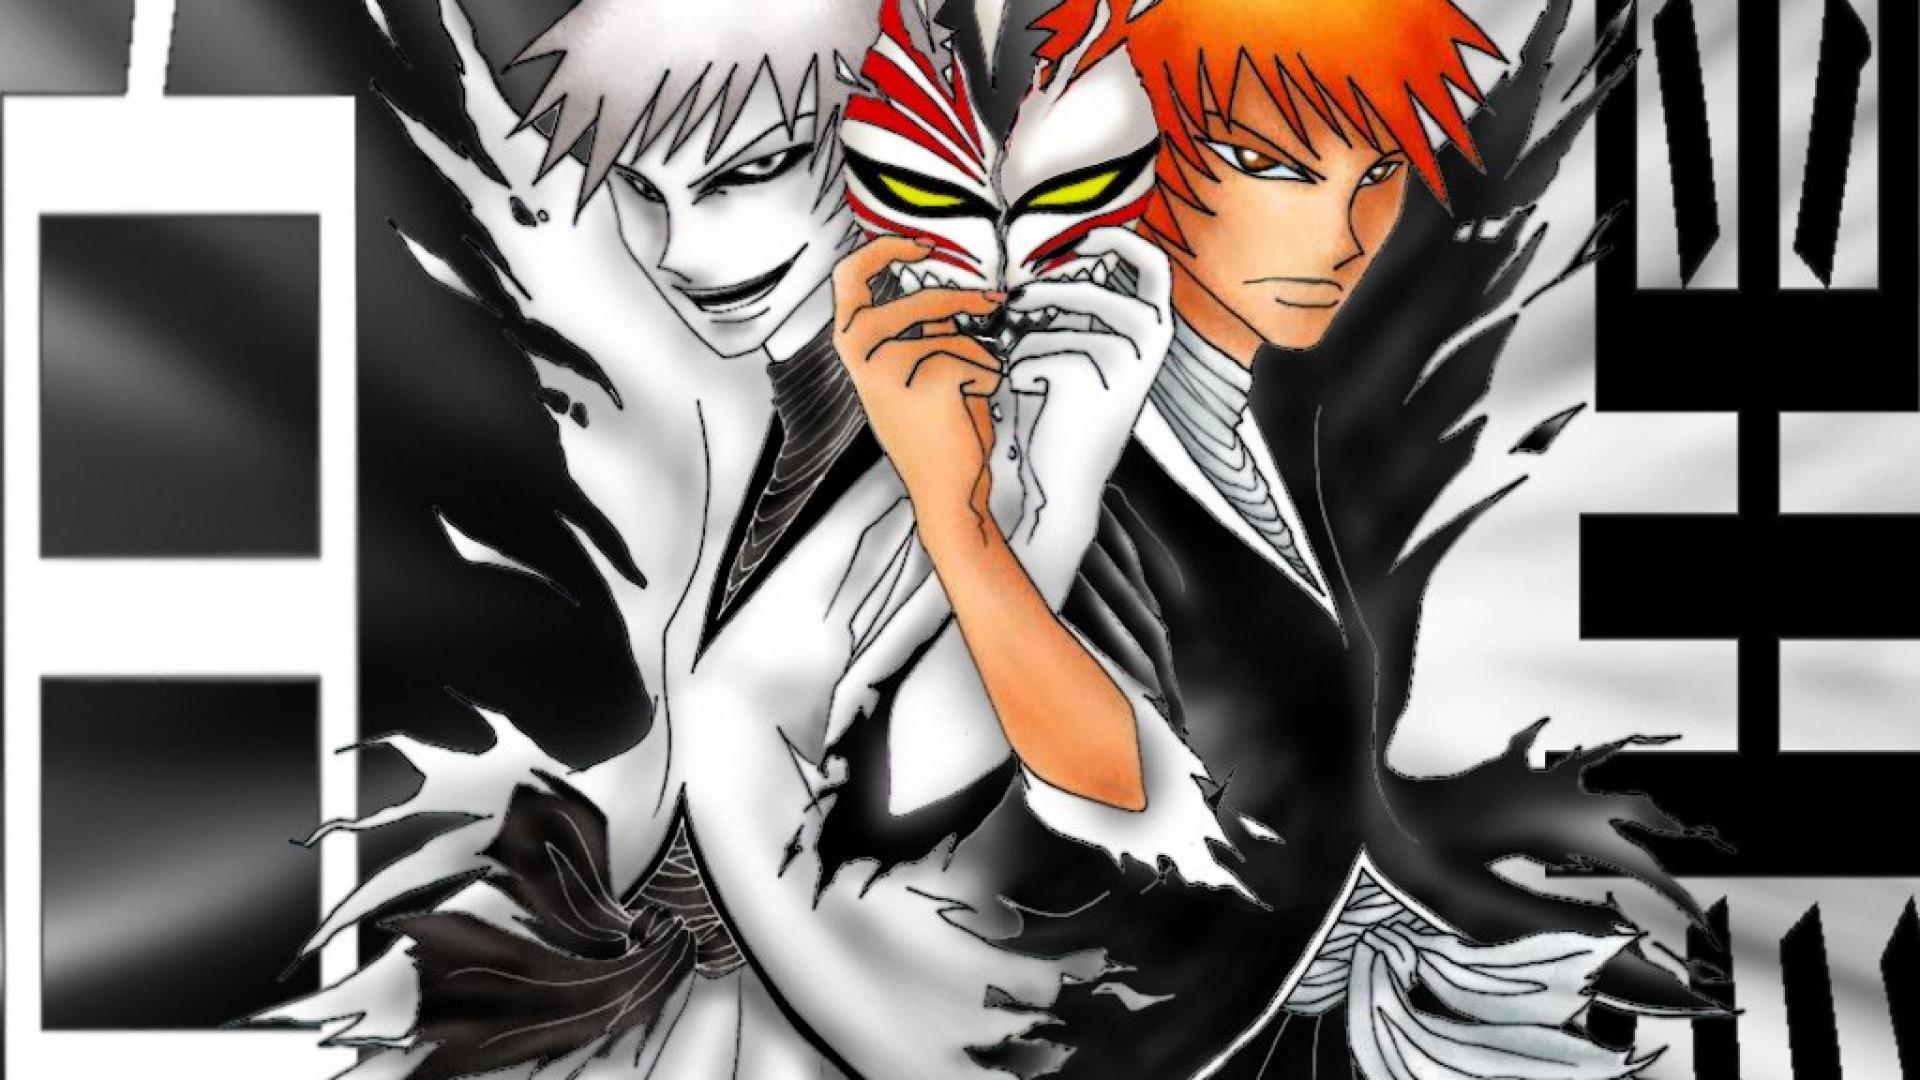 Bleach Anime Wallpapers Top Free Bleach Anime Backgrounds